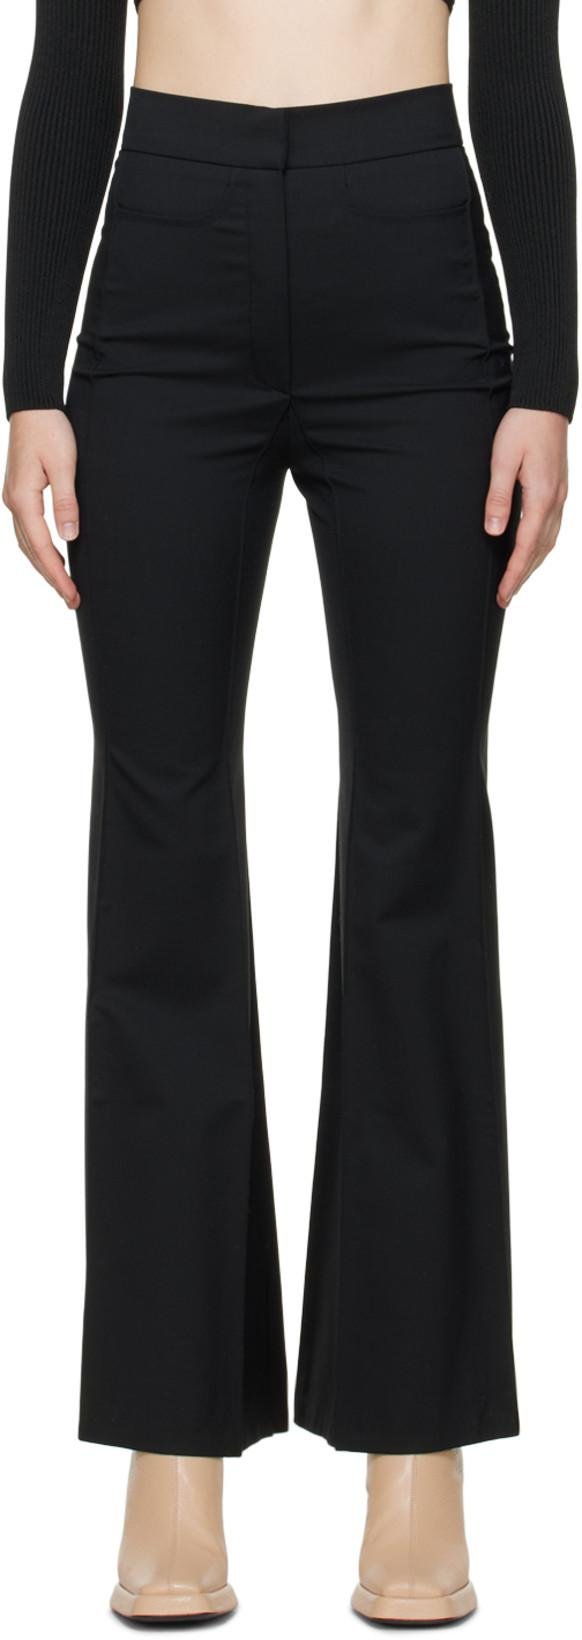 Black Flared Trousers by BEVZA